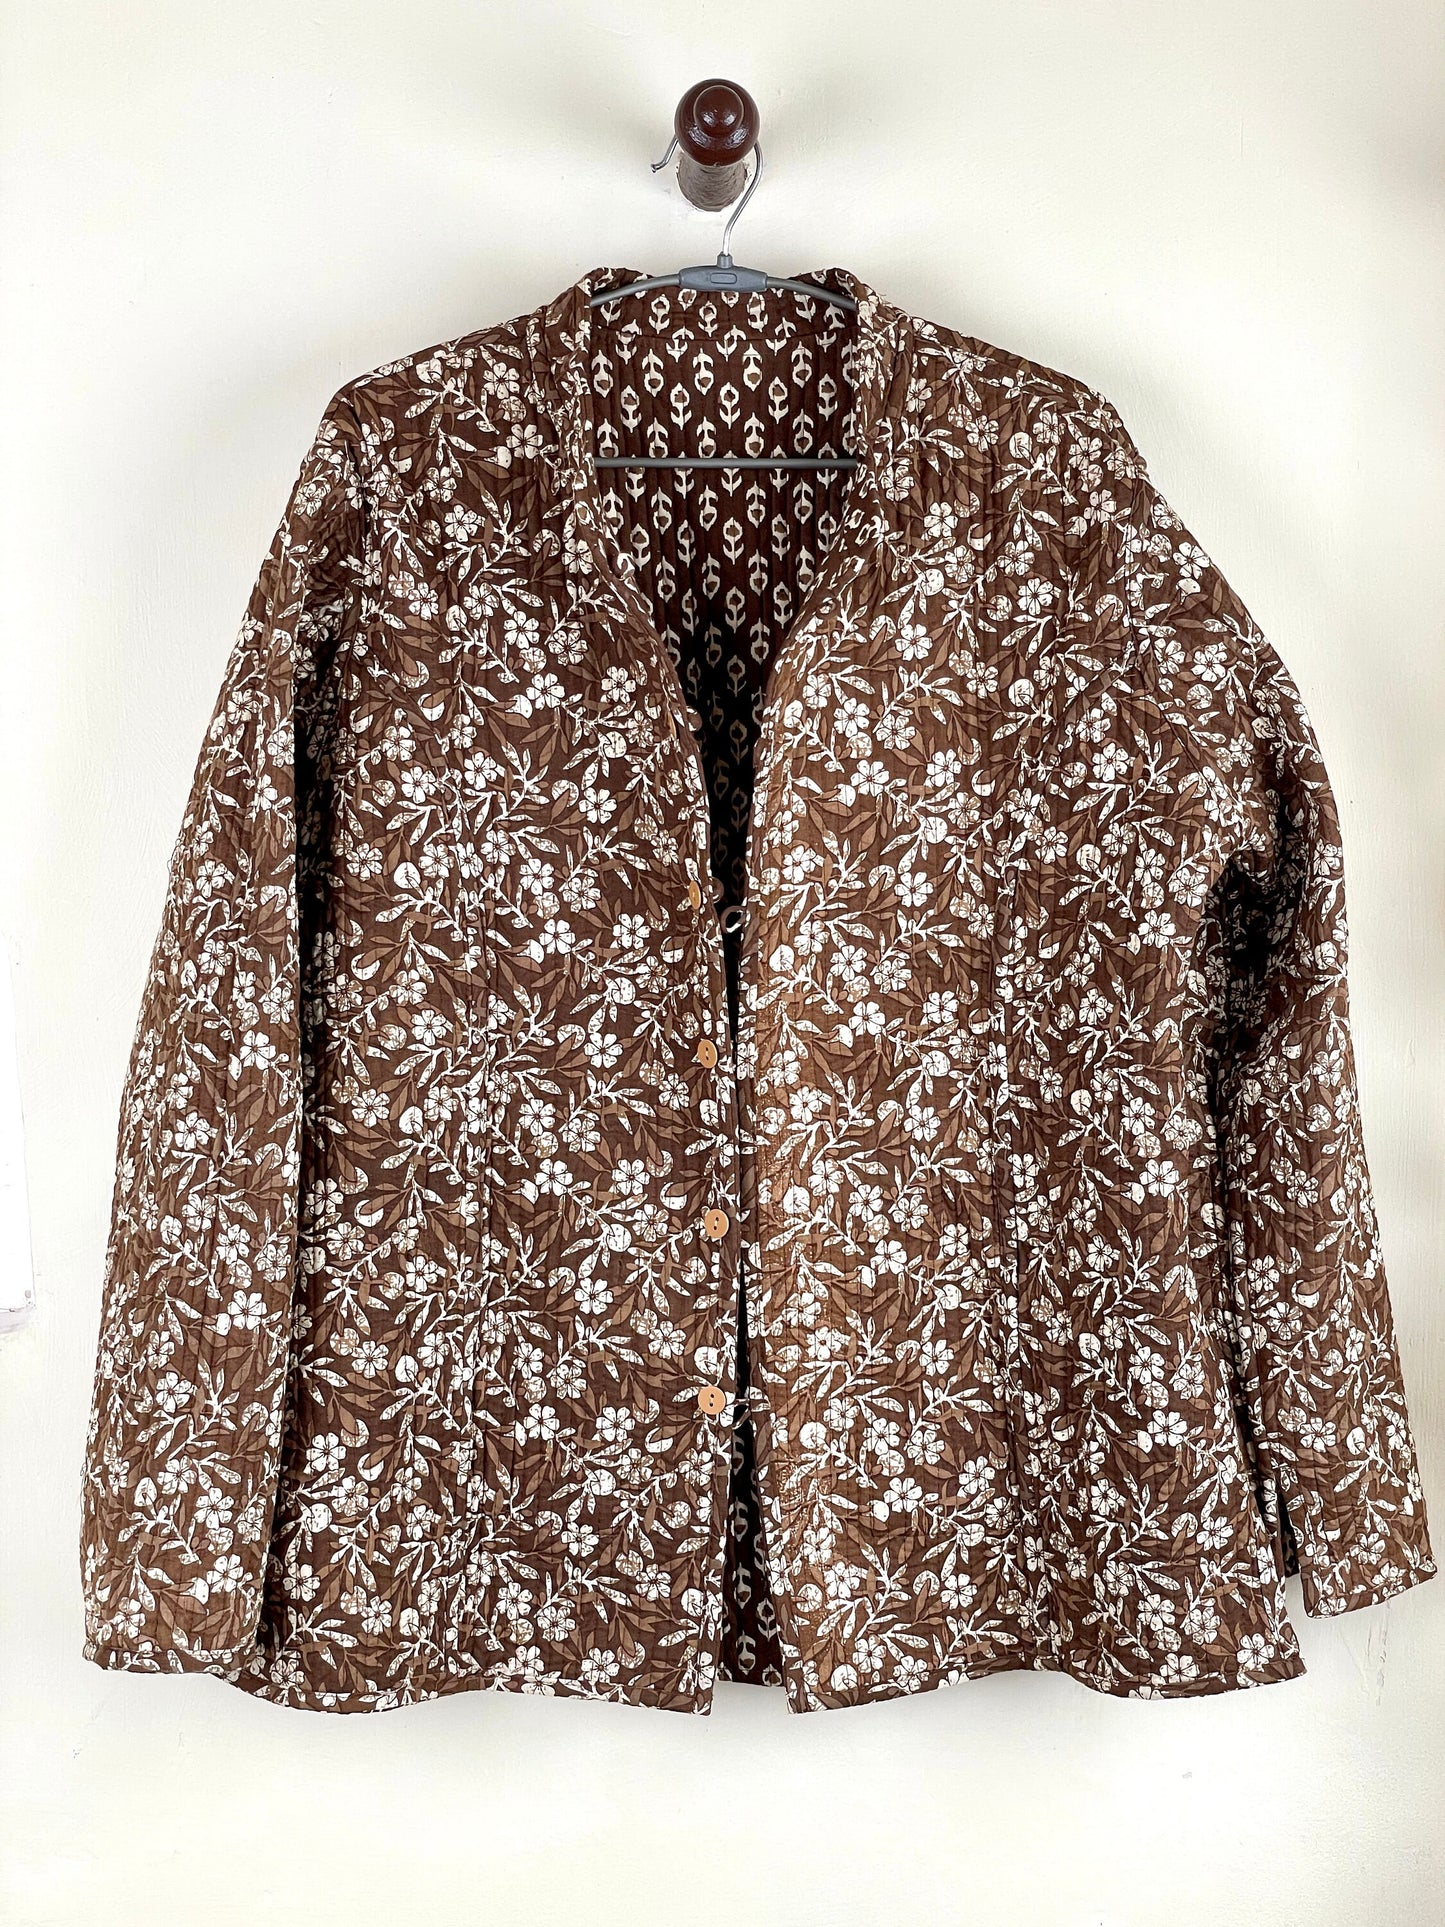 Indian Handmade Quilted Cotton Fabric Jacket Stylish Brown & White Floral Women's Coat, Reversible Waistcoat, Christmas Gift for Her